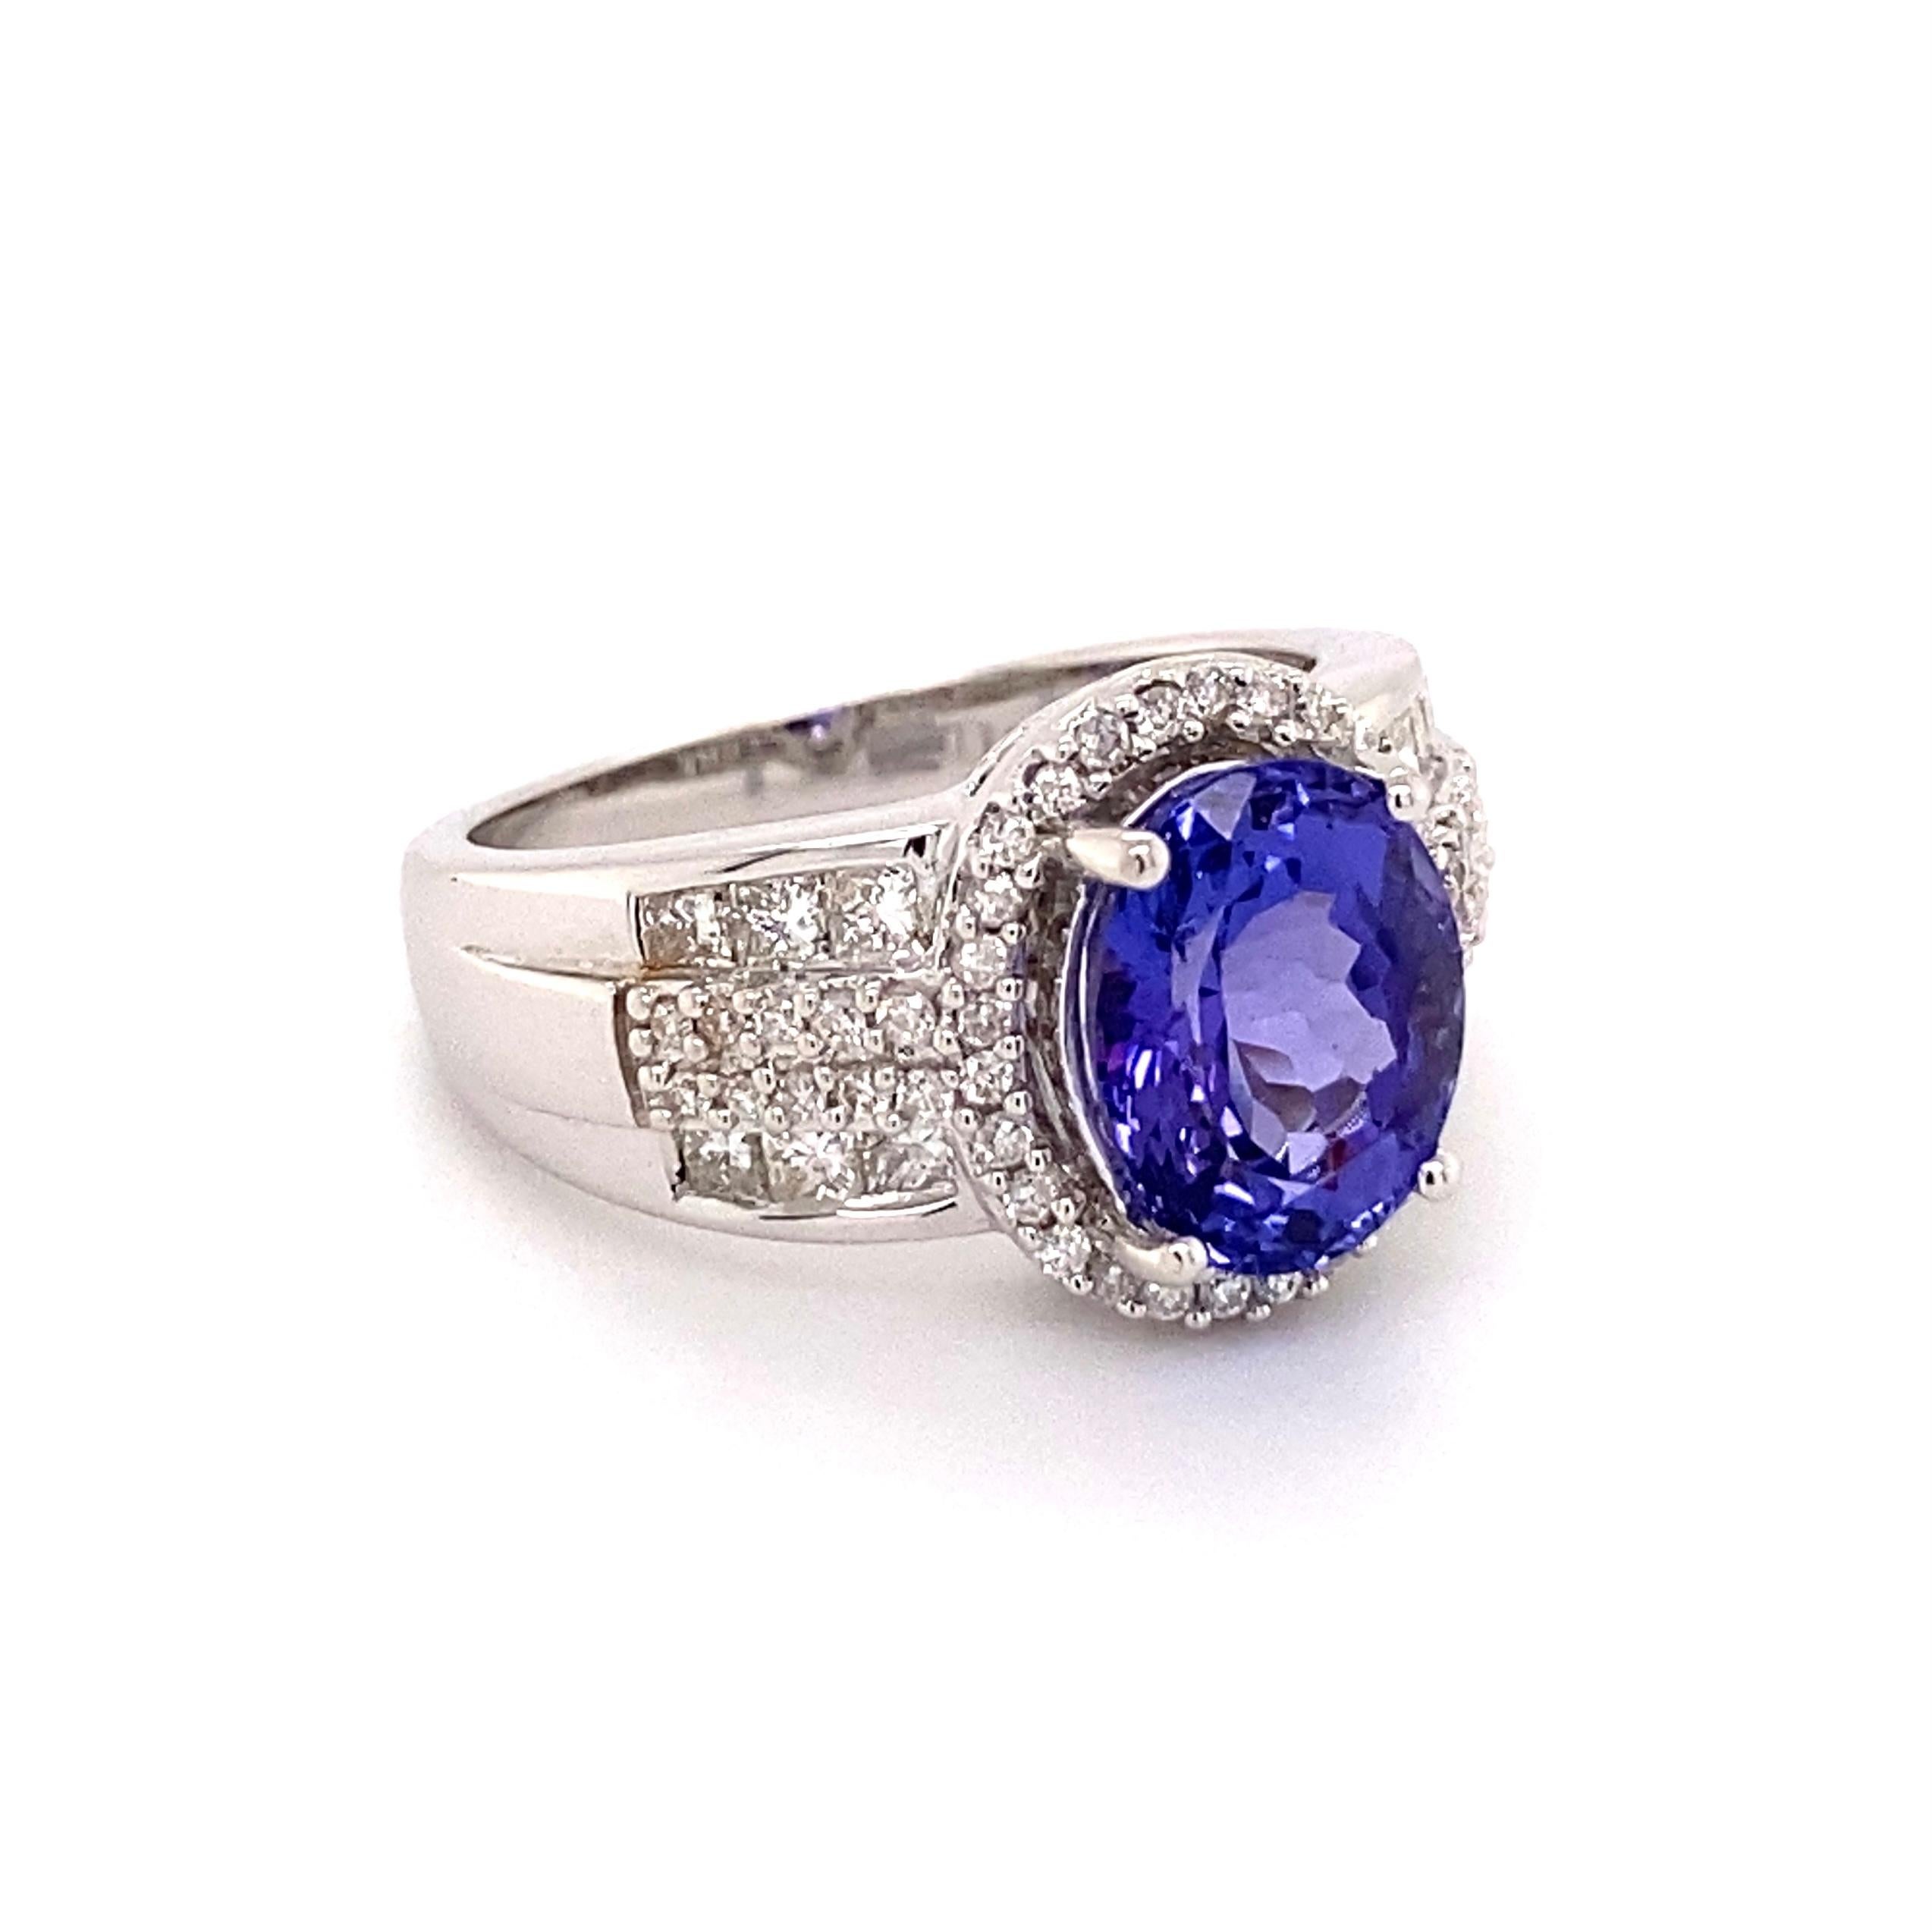 Simply Beautiful! Tanzanite and Diamond ILIANA Designer Cocktail Ring centered by an Oval 2.95 Carat Tanzanite, surrounded by Diamonds, approx. 0.59tcw. Hand crafted 18K White Gold mounting. Approx. Dimensions: 1.02” l x 0.84” w x 0.51” h. Ring size